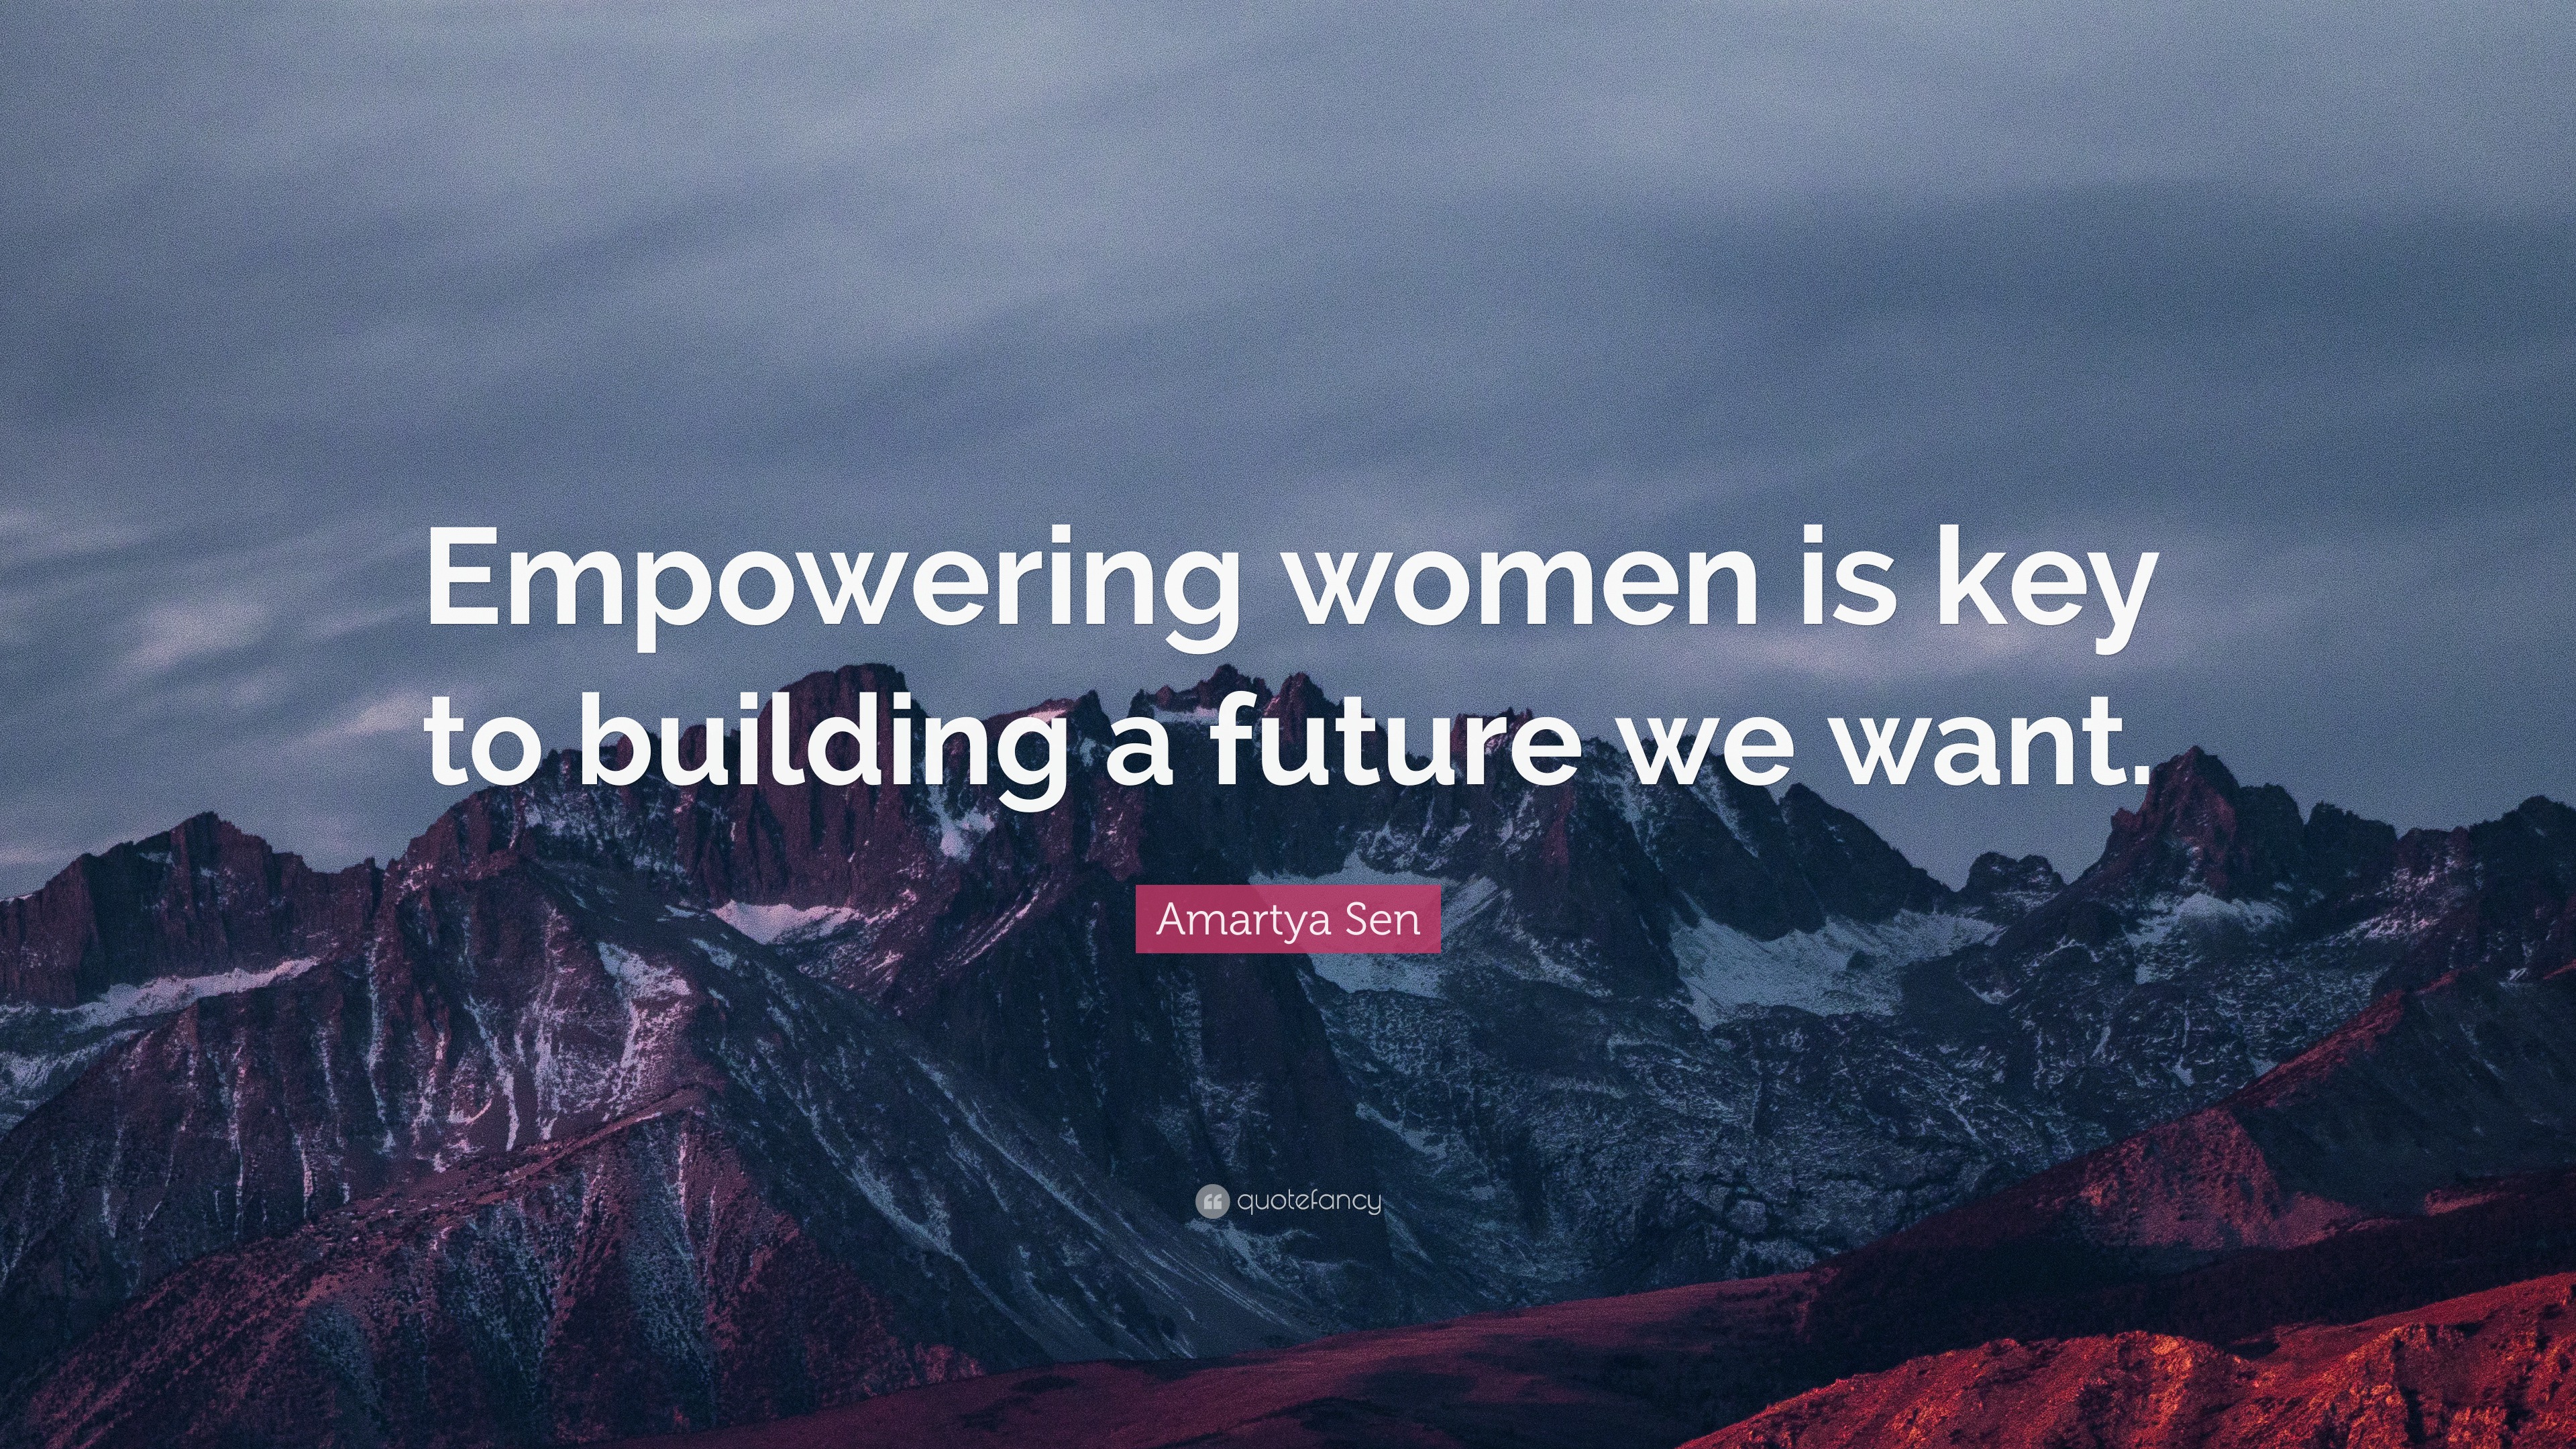 Amartya Sen Quote: “Empowering women is key to building a future